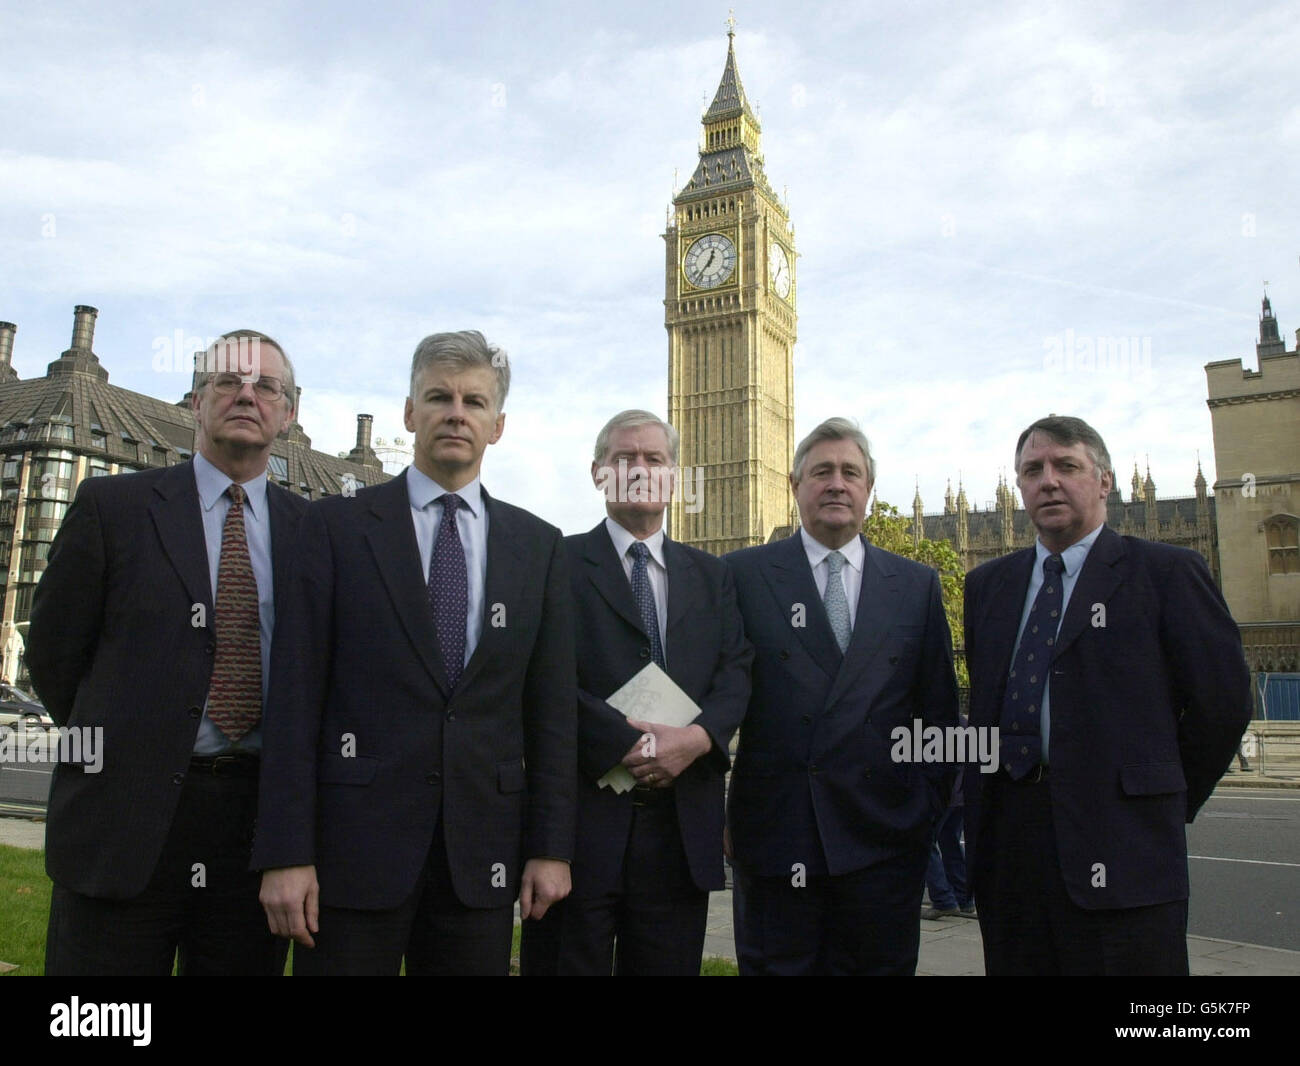 From left, MP for Nuneaton Bill Olner, MP for North Warwickshire Mike O'Brien, MP for Coventry South Jim Cunningham, MP for Coventry North West Geoffrey Robinson and MP for Rugby and Kenilworth Andy King outside the Houses of Parliament in London. *... The five are protesting about the running of Coventry's NHS trust. Stock Photo